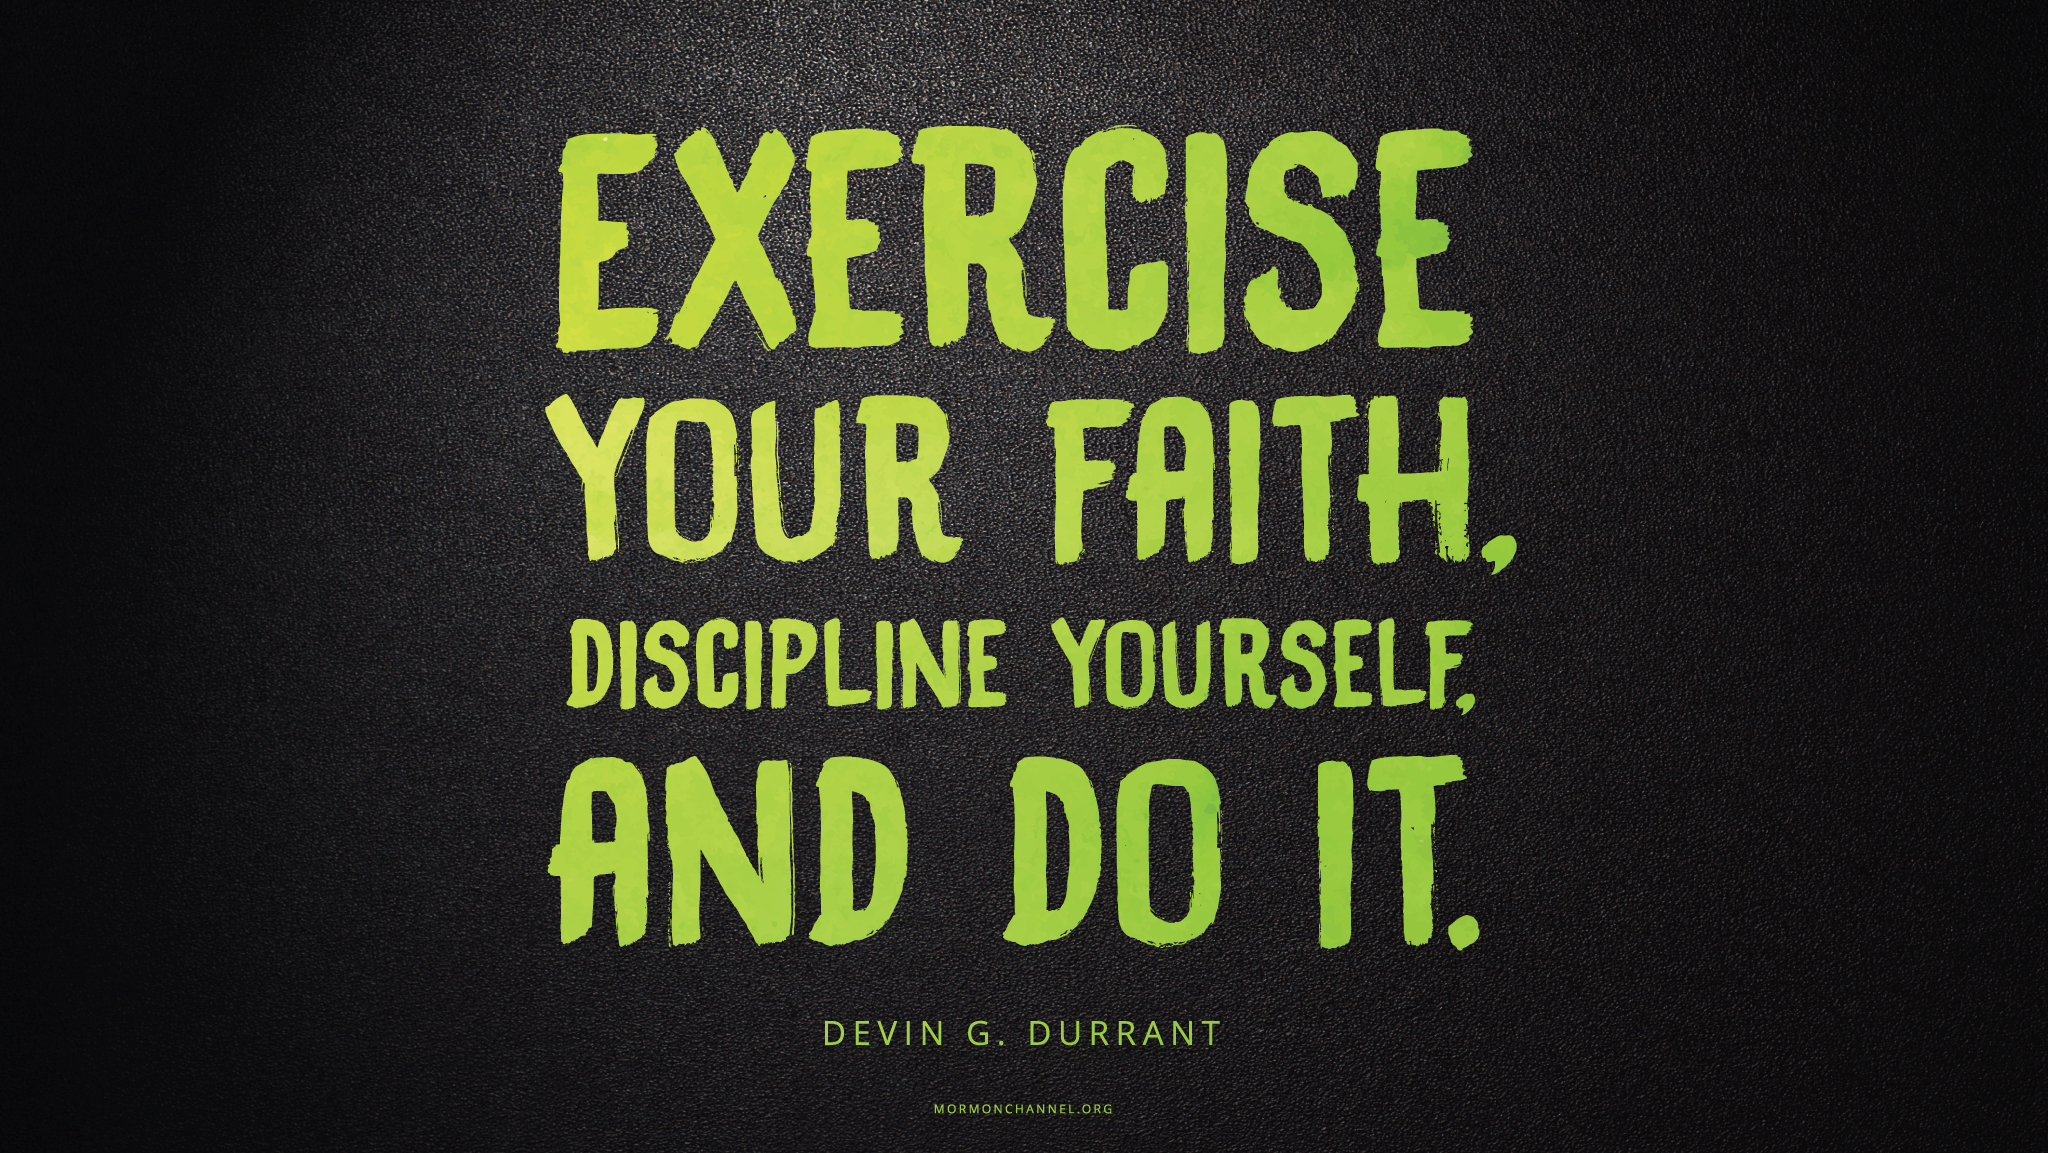 exercise your faith, discipline yourself and do it. devin g. durrant